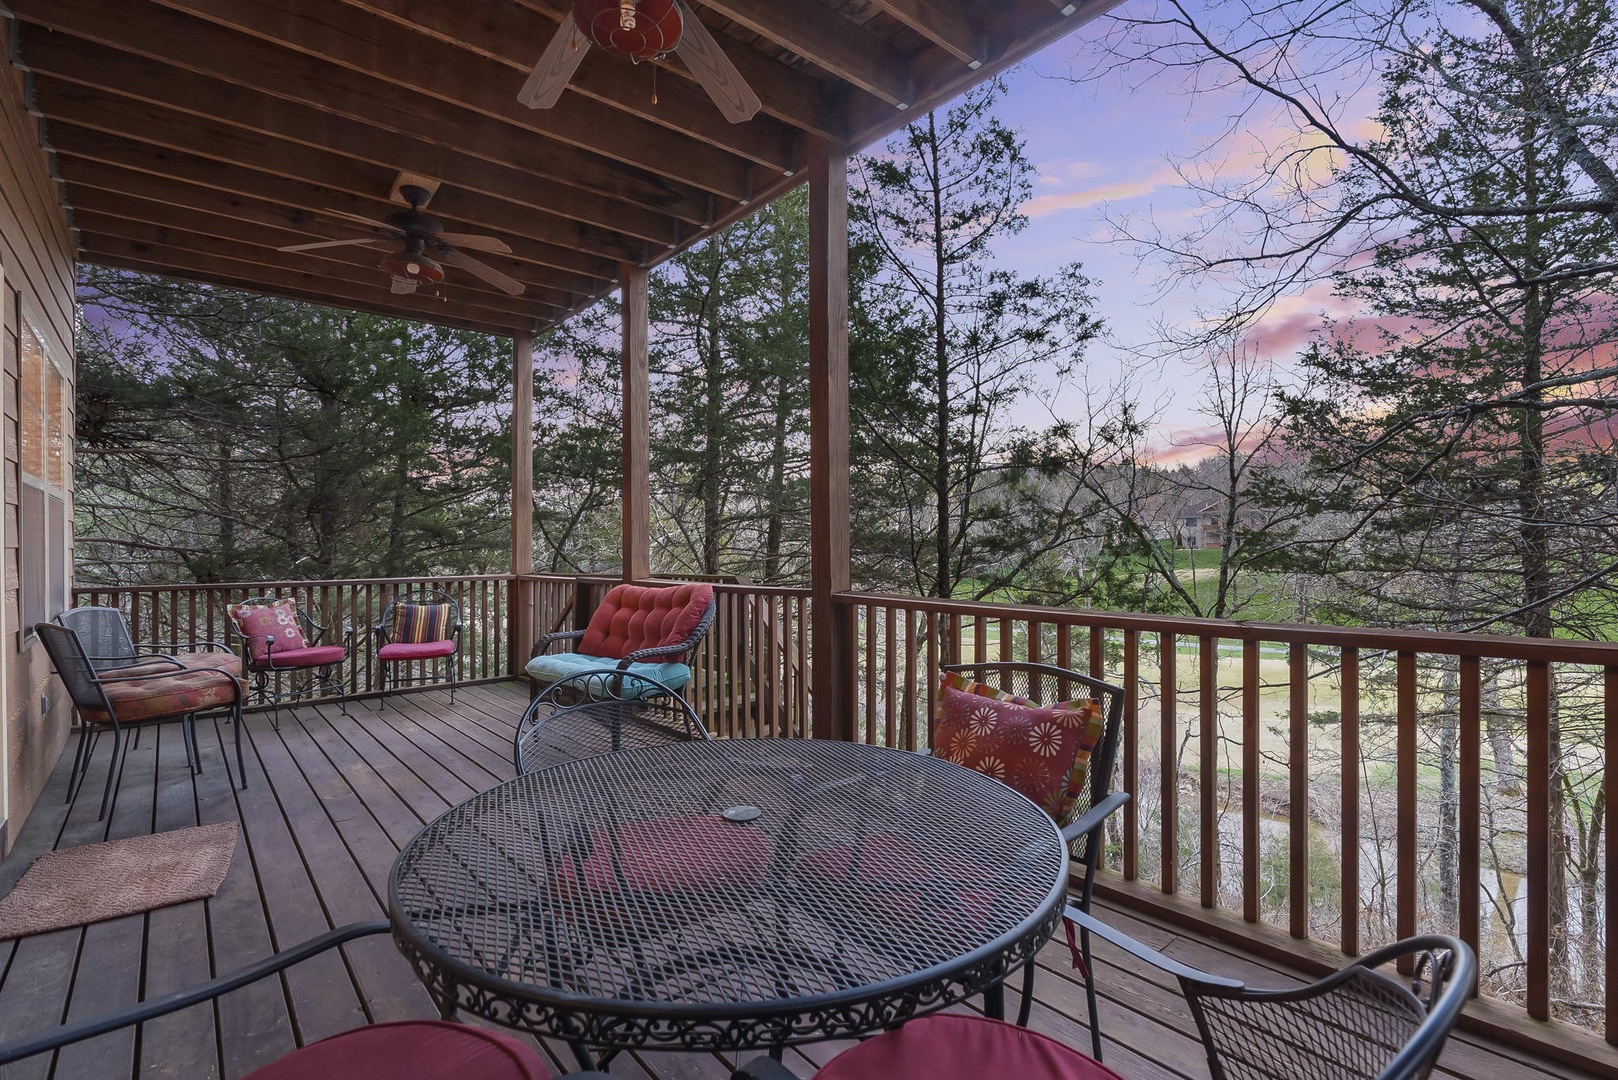 Back deck with outdoor seating